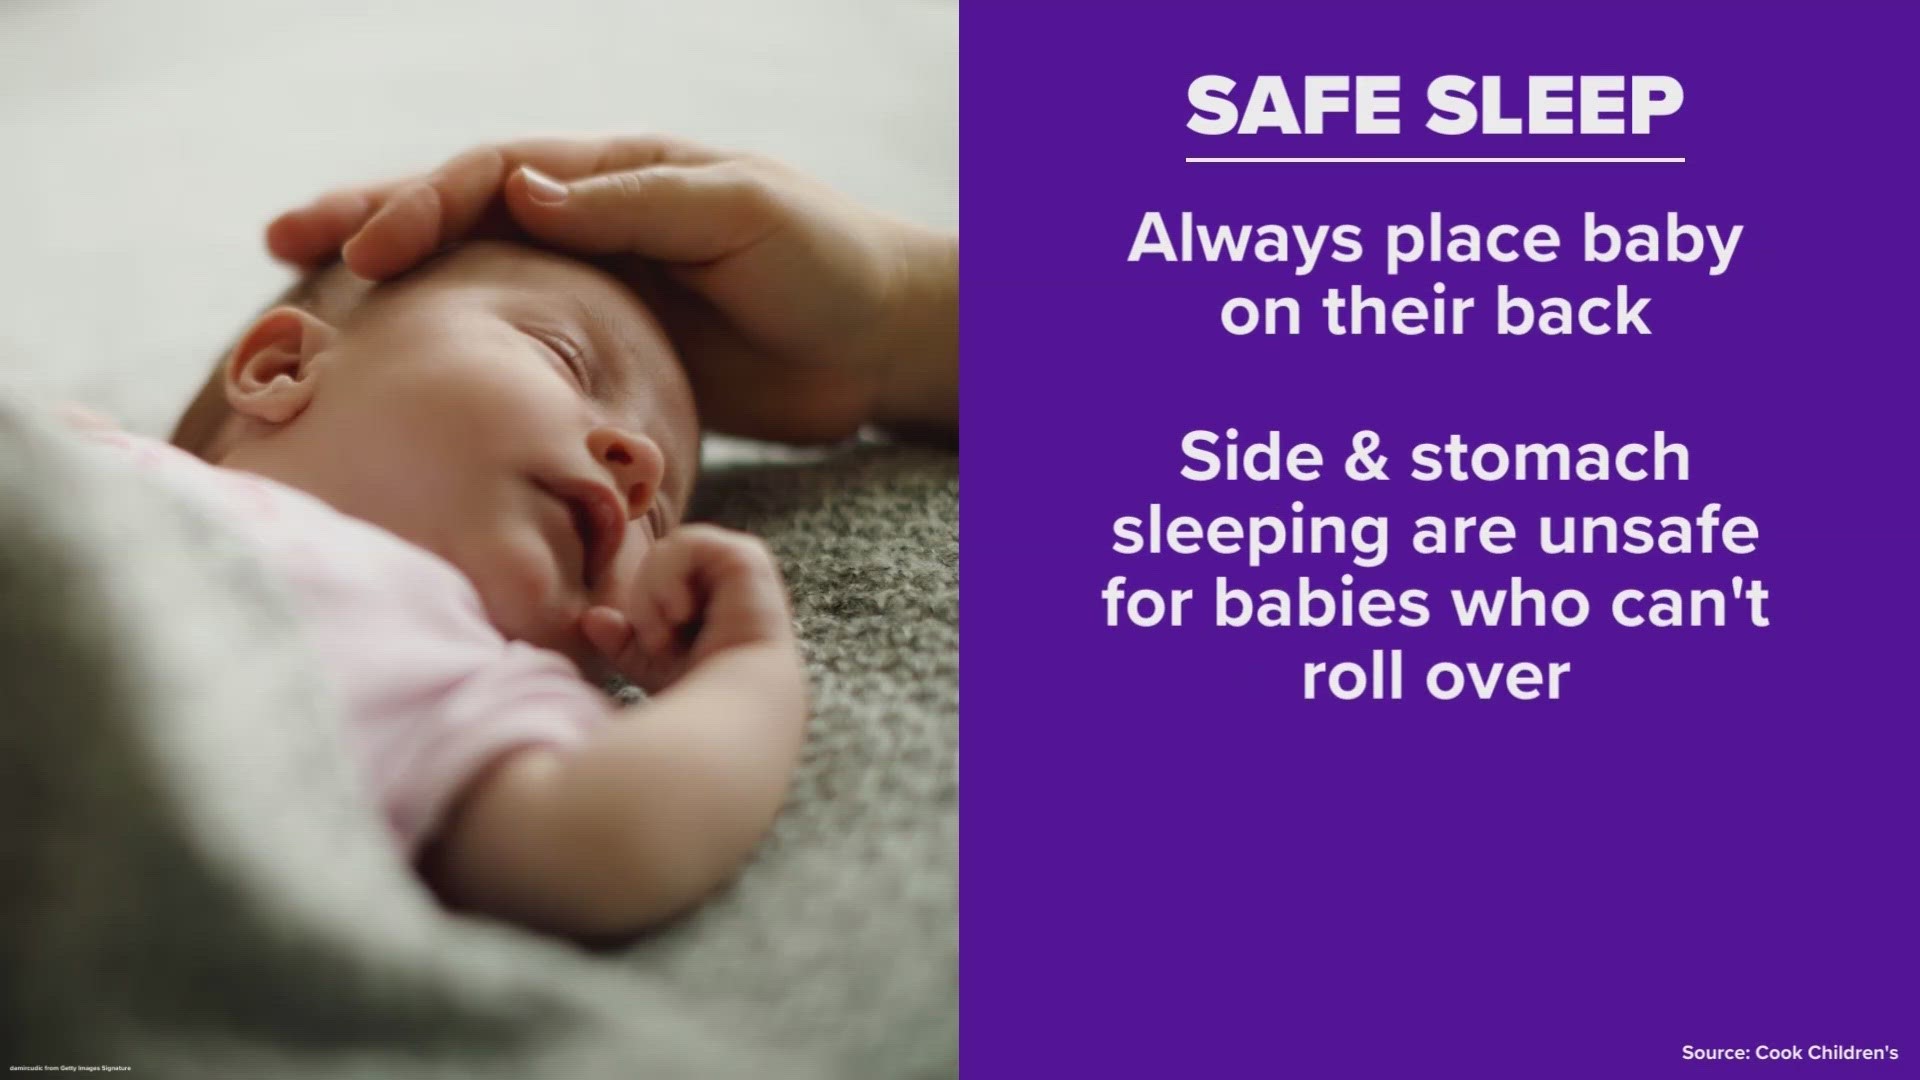 Doctors are warning parents about a spike in infant deaths linked to unsafe sleeping situations.